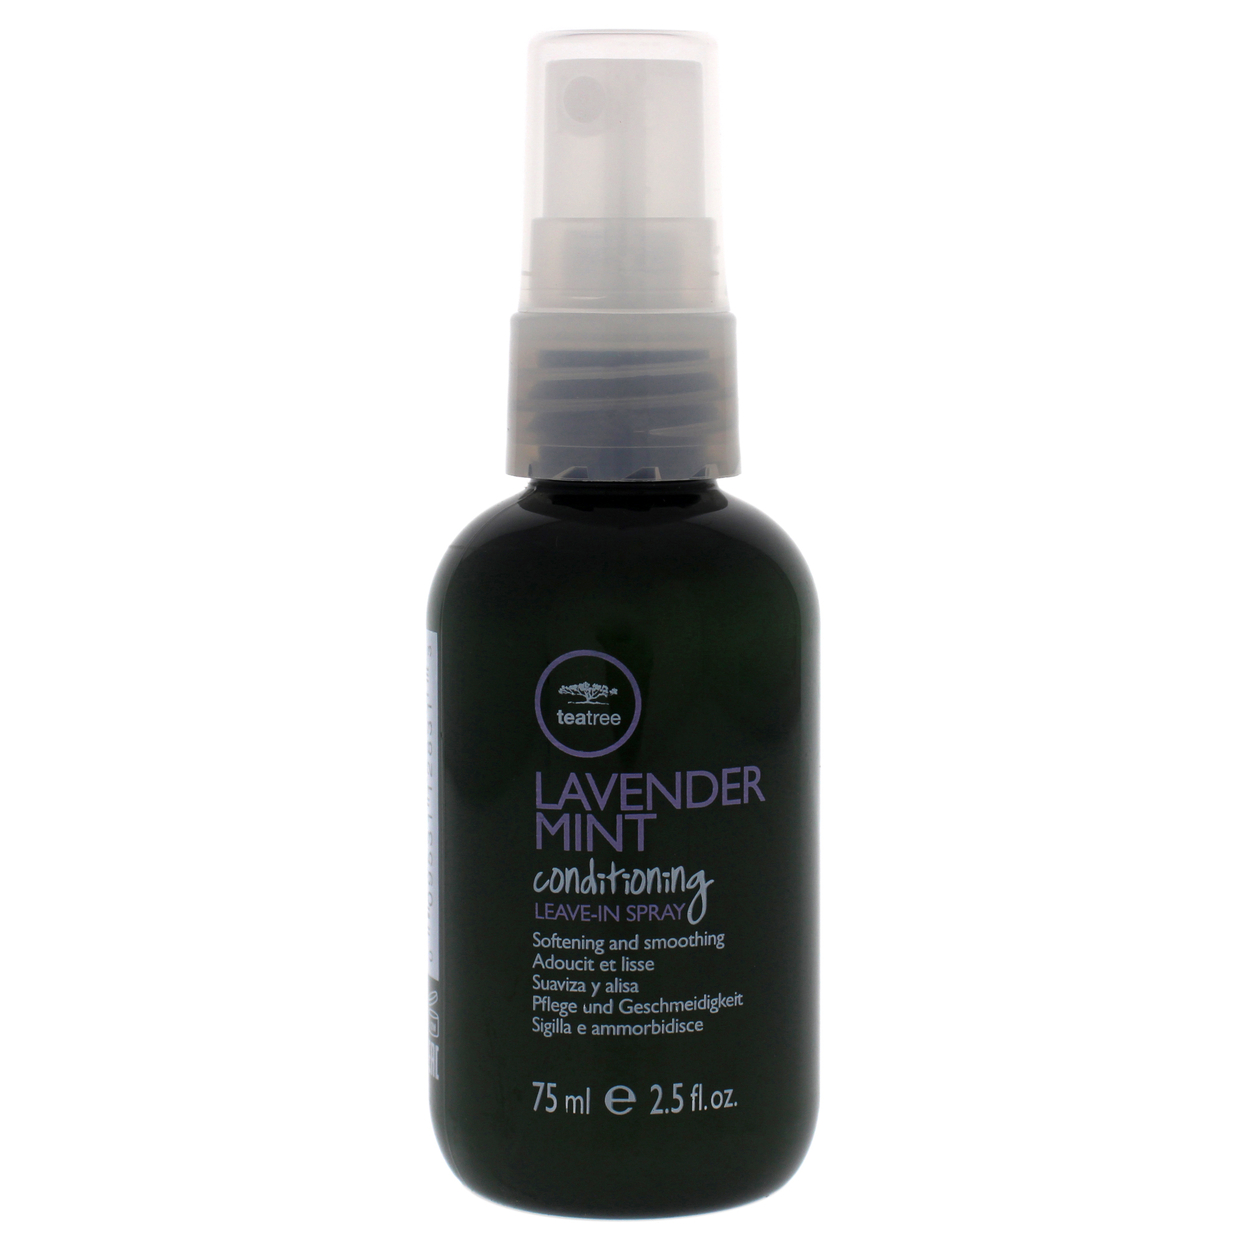 Paul Mitchell Tea Tree Conditioning Leave-In Spray - Lavender Mint Hair Spray 2.5 Oz